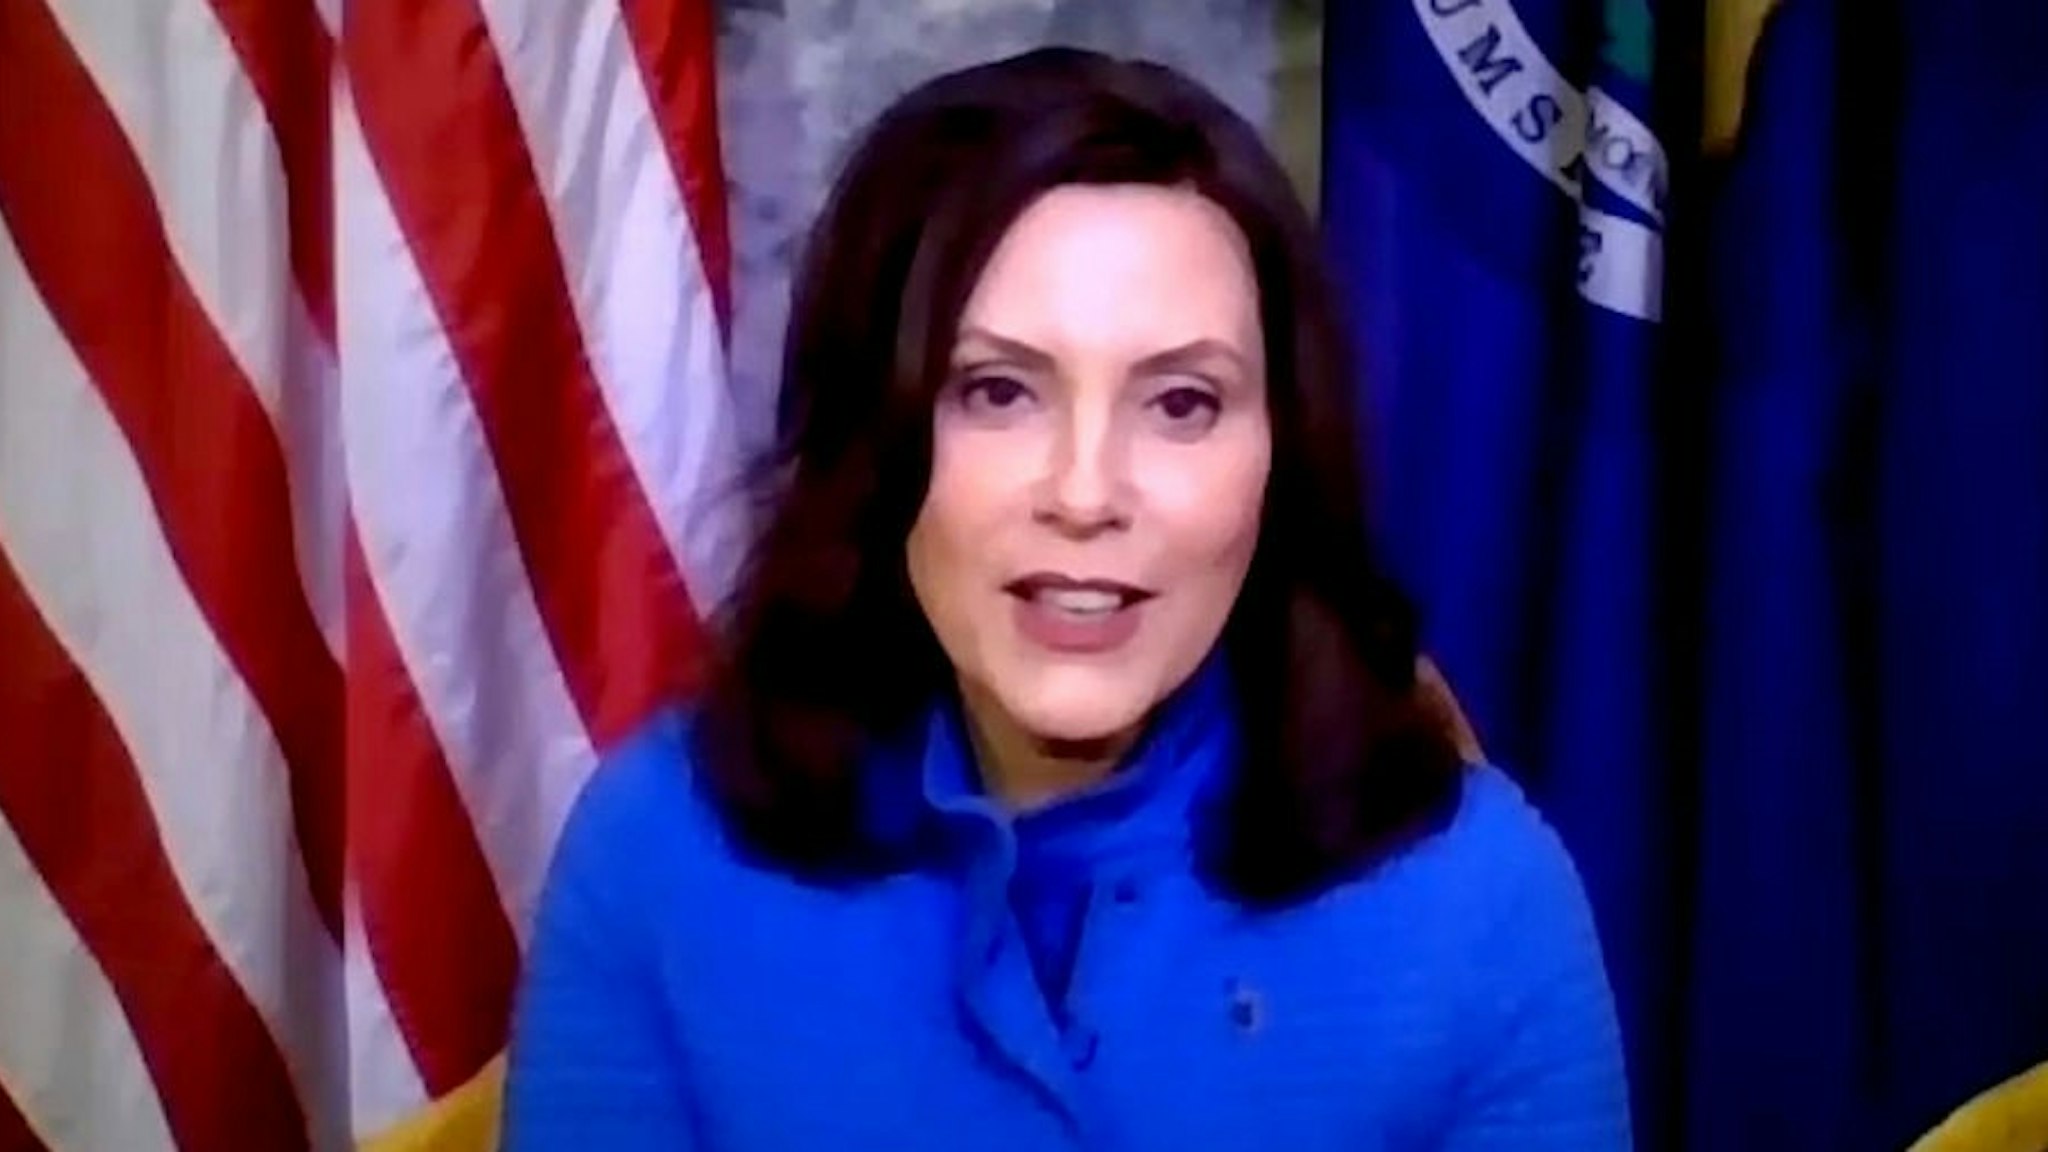 LATE NIGHT WITH SETH MEYERS -- Episode 989A -- Pictured in this screen grab: Gov. Gretchen Whitmer during an interview on May 18, 2020 -- (Photo by: